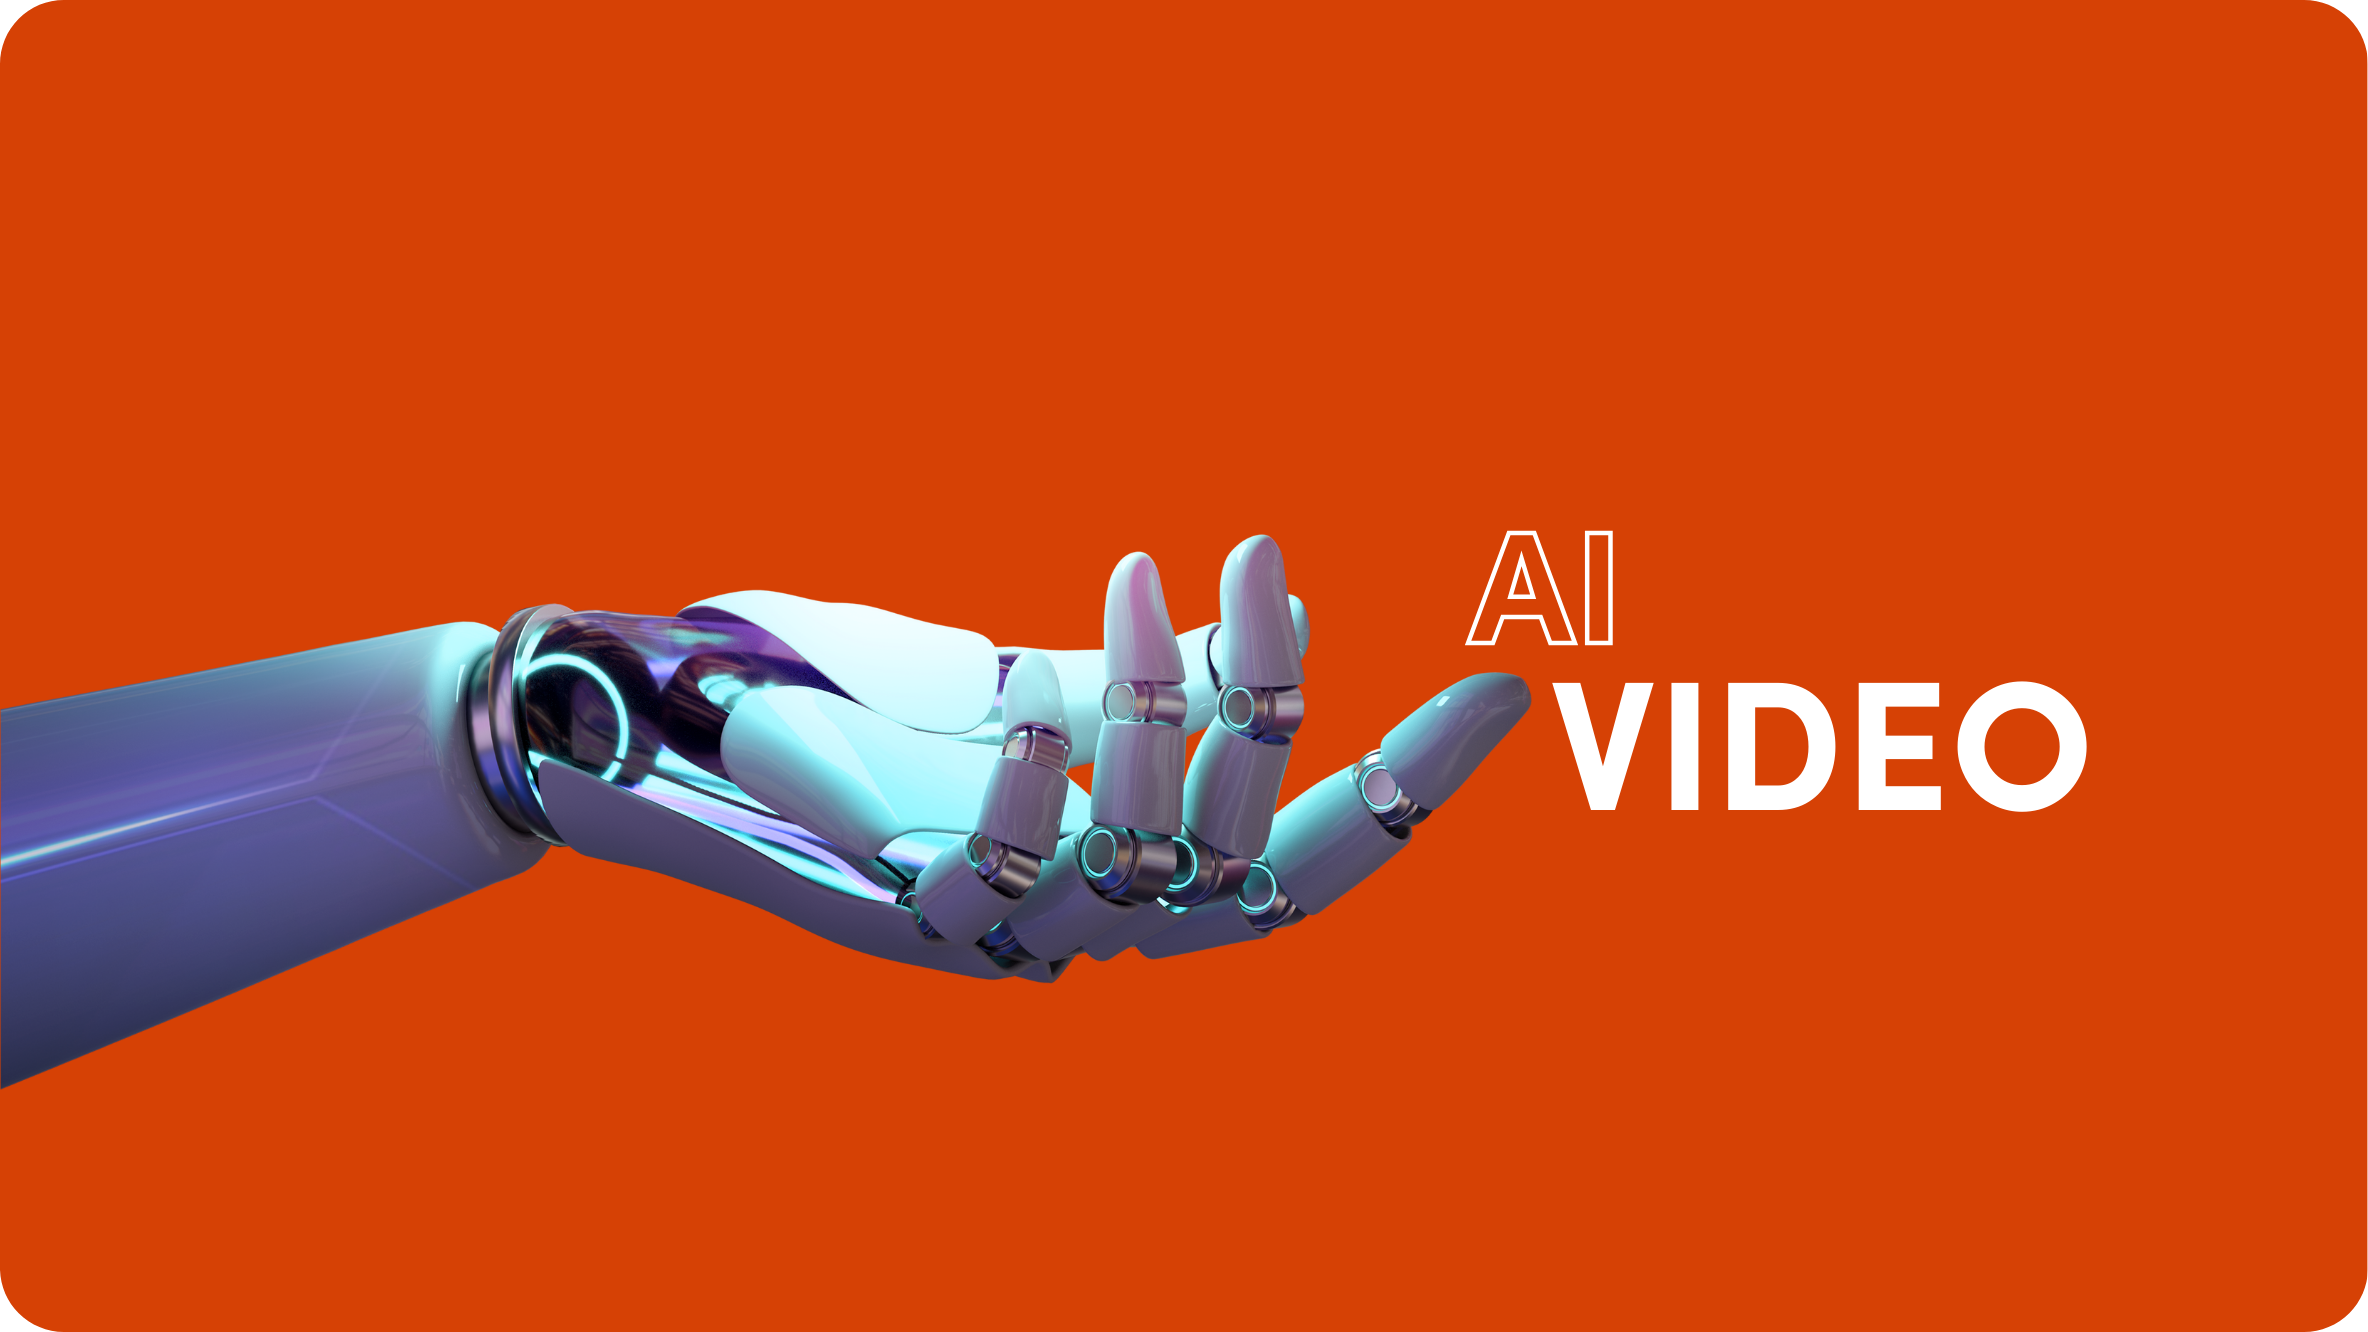 5 Best AI Video Generation Tools on the Market Right Now